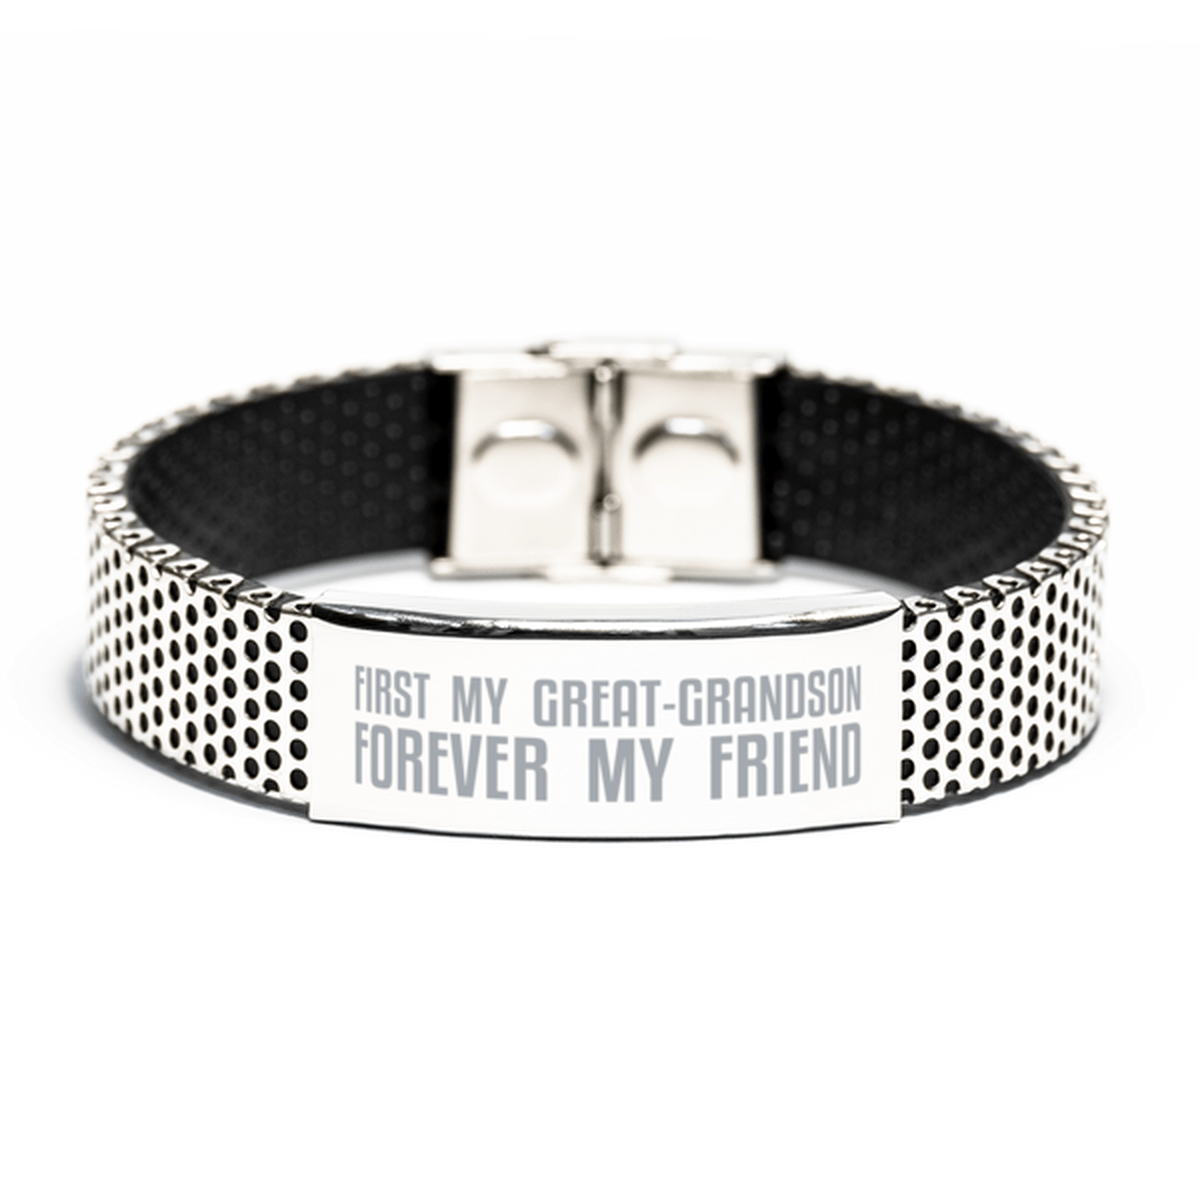 Unique Great-grandson Stainless Steel Bracelet, First My Great-grandson Forever My Friend, Best Gift for Great-grandson Birthday, Christmas